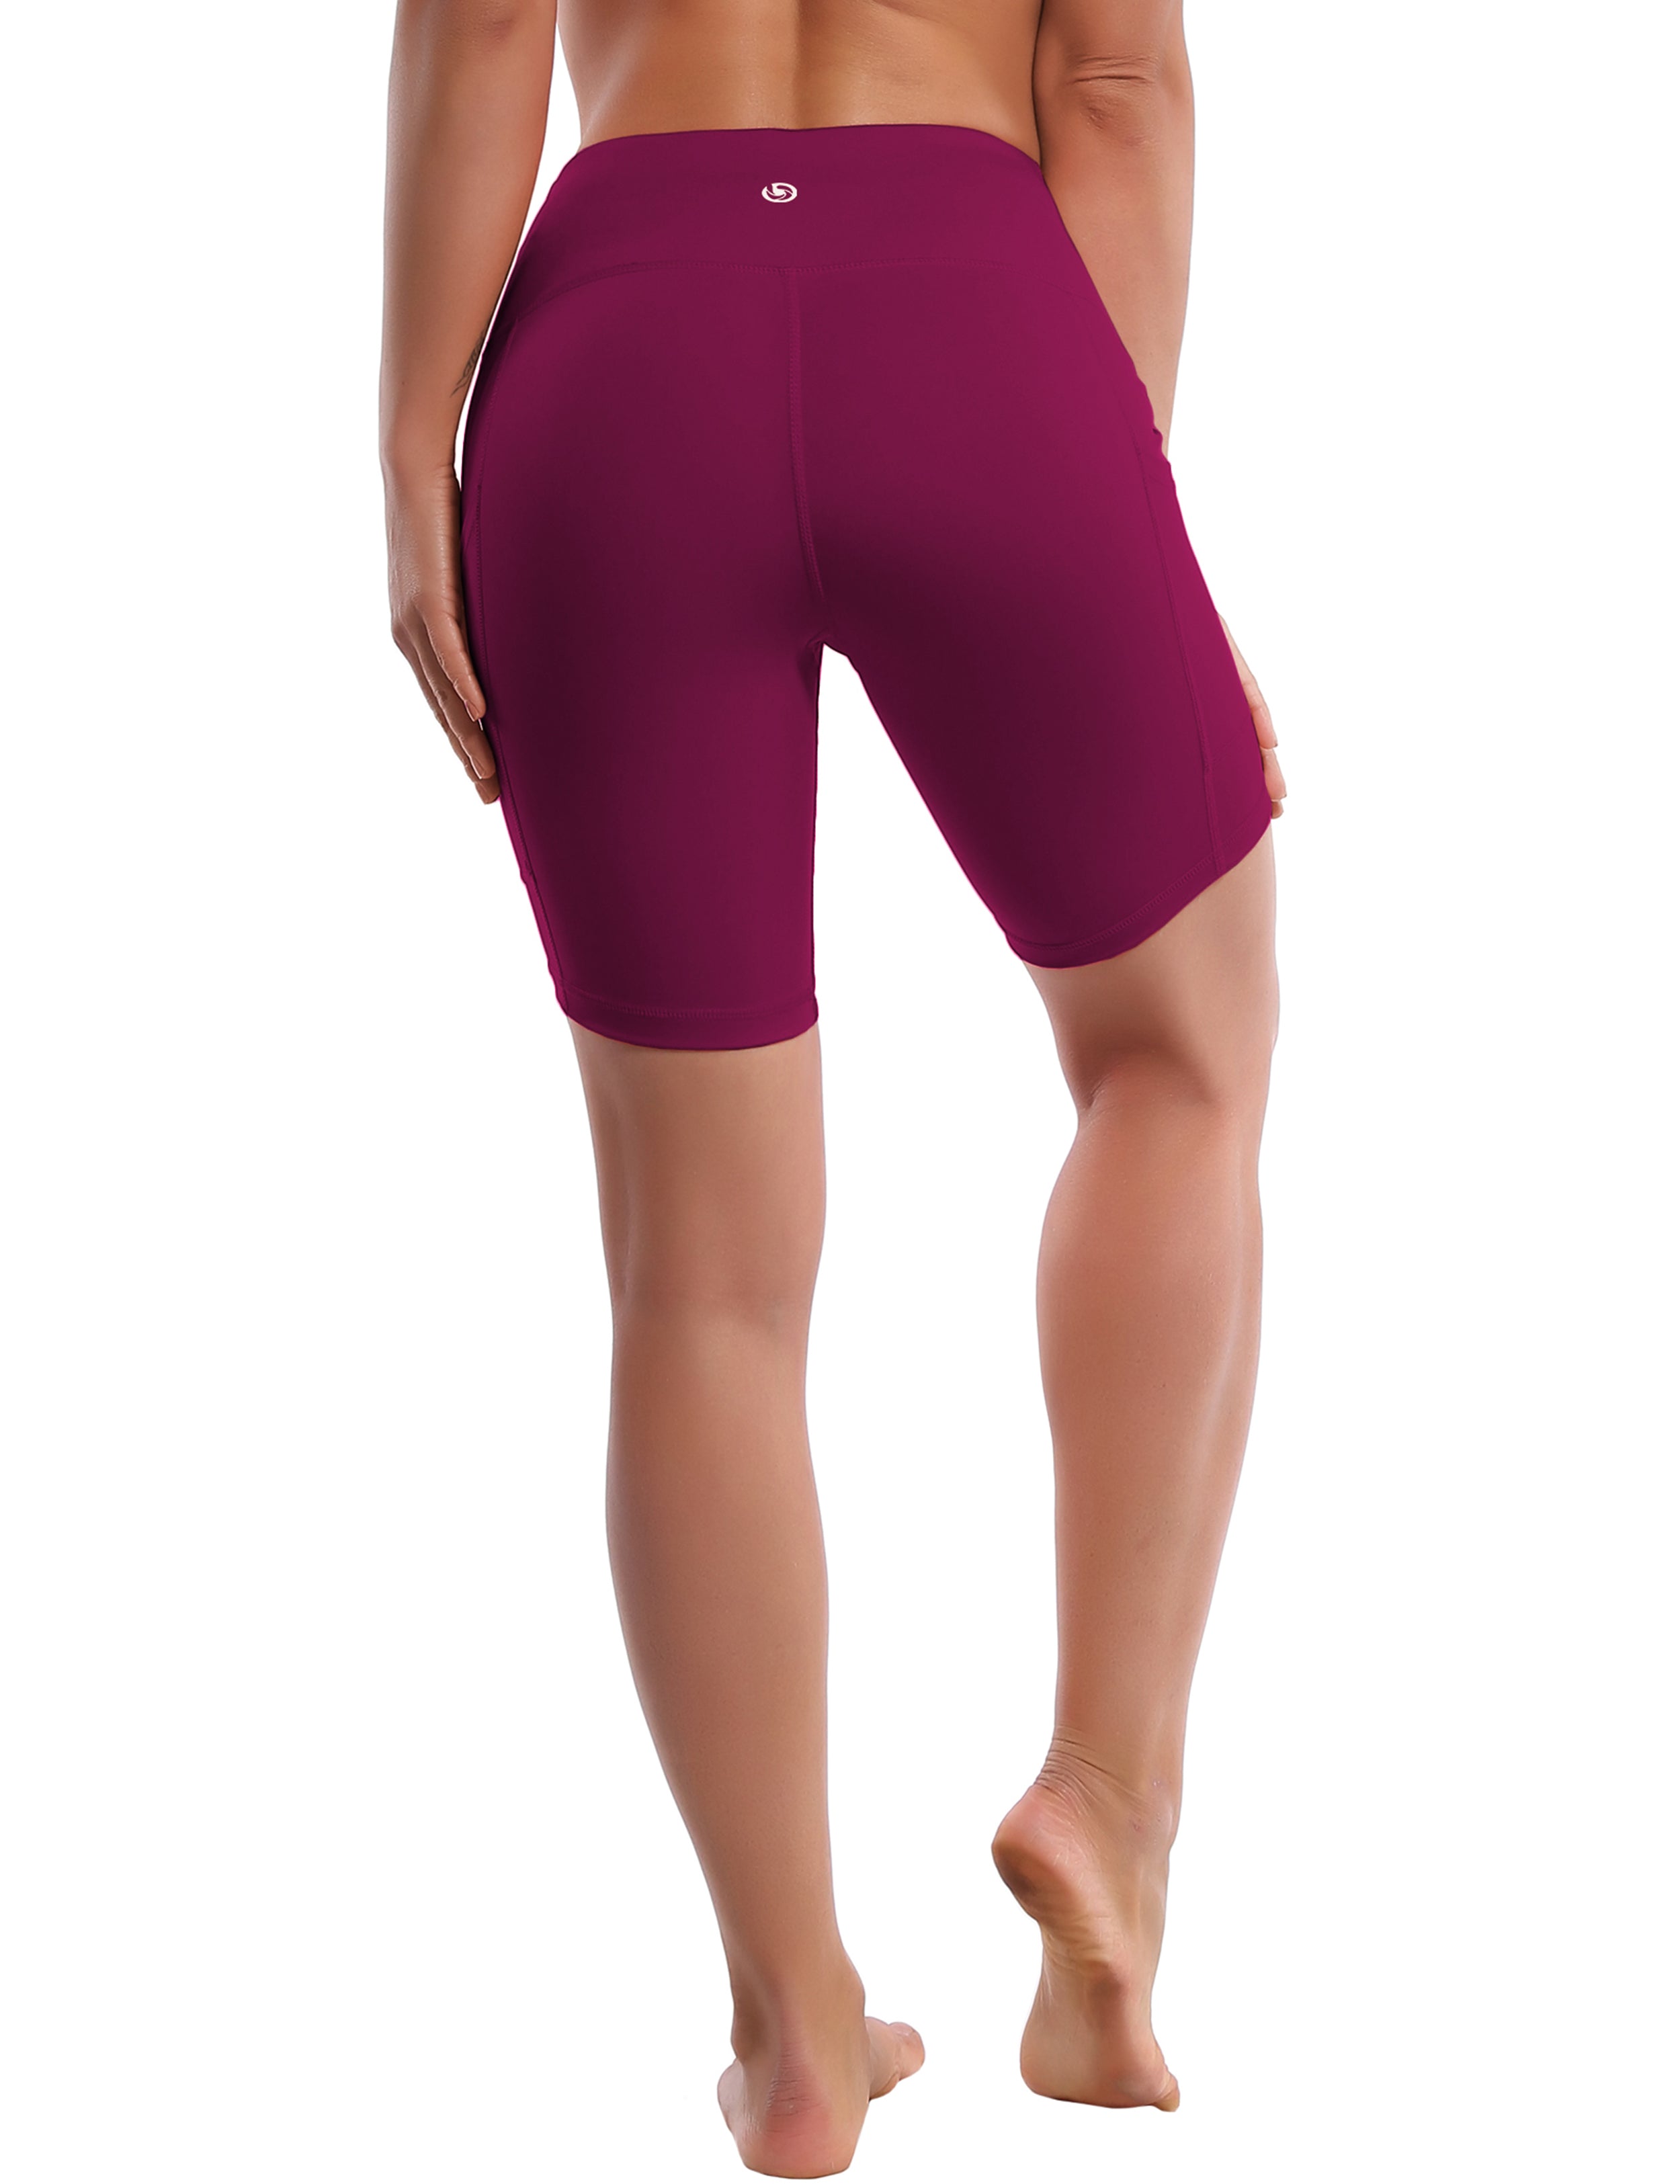 8" Side Pockets Yoga Shorts grapevine Sleek, soft, smooth and totally comfortable: our newest style is here. Softest-ever fabric High elasticity High density 4-way stretch Fabric doesn't attract lint easily No see-through Moisture-wicking Machine wash 75% Nylon, 25% Spandex